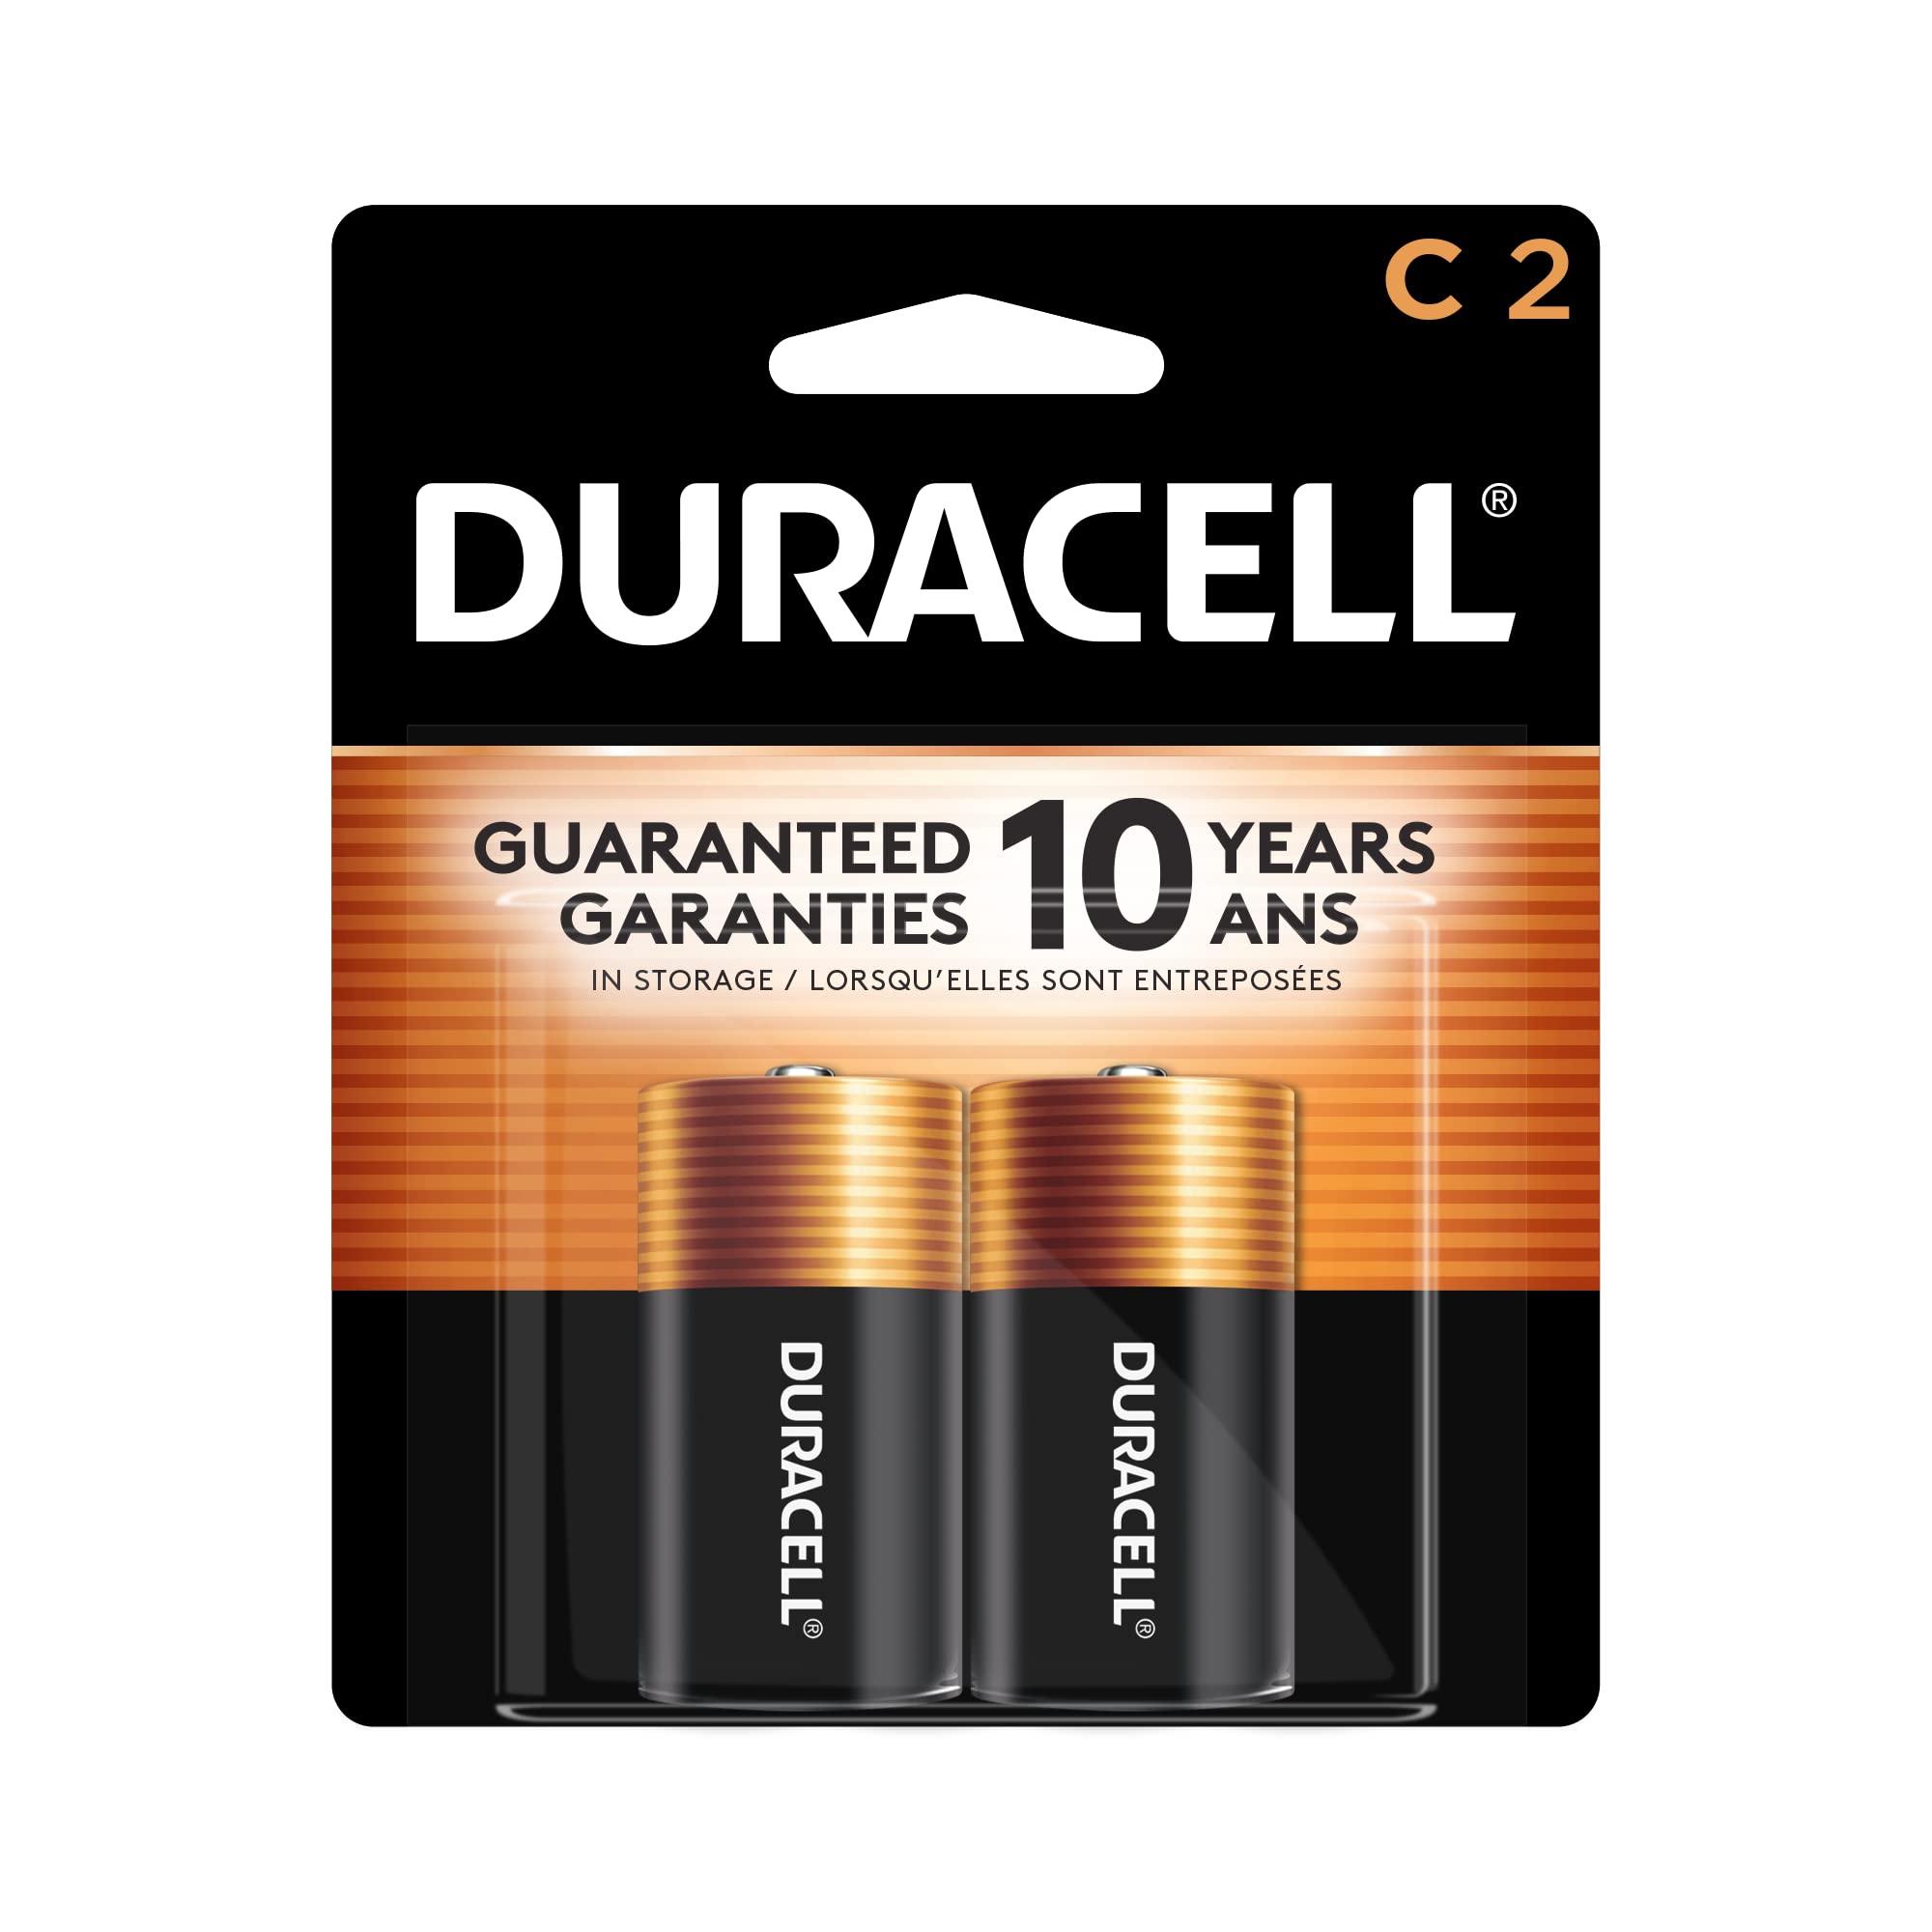 DURACELL Coppertop 1.5V Size C Alkaline Battery, (Pack of 4) - image 1 of 5